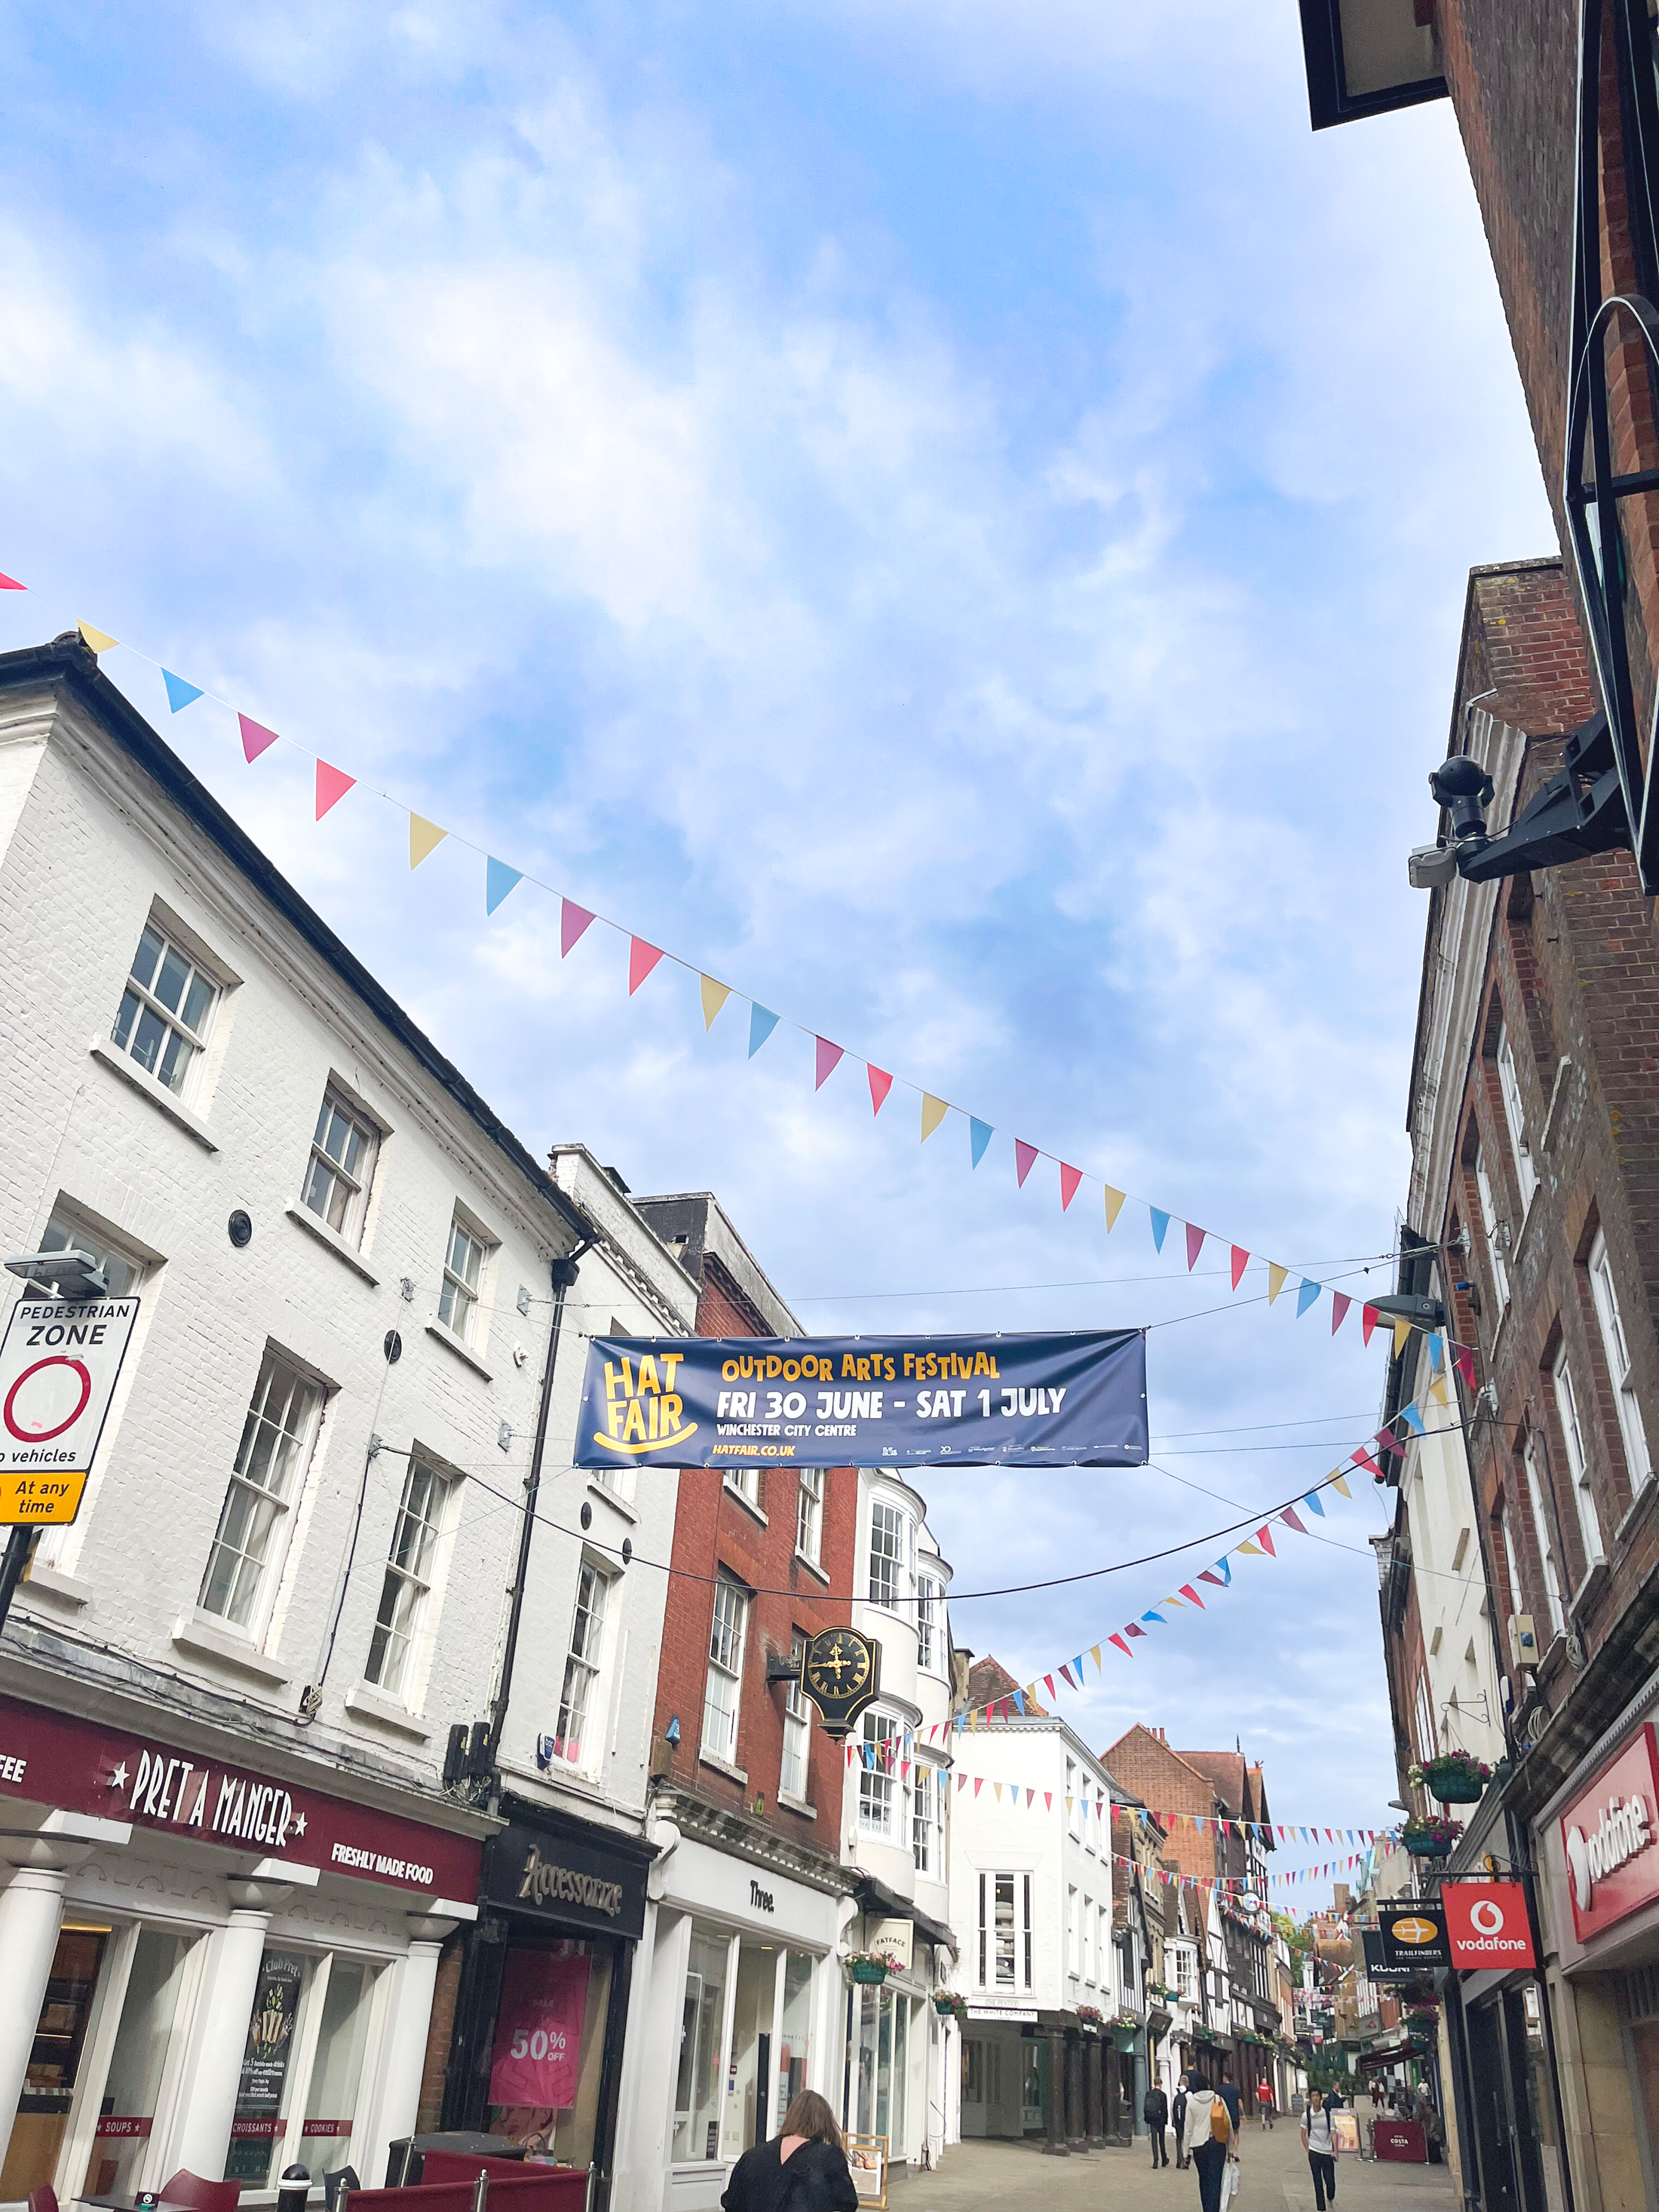 The high street bunting